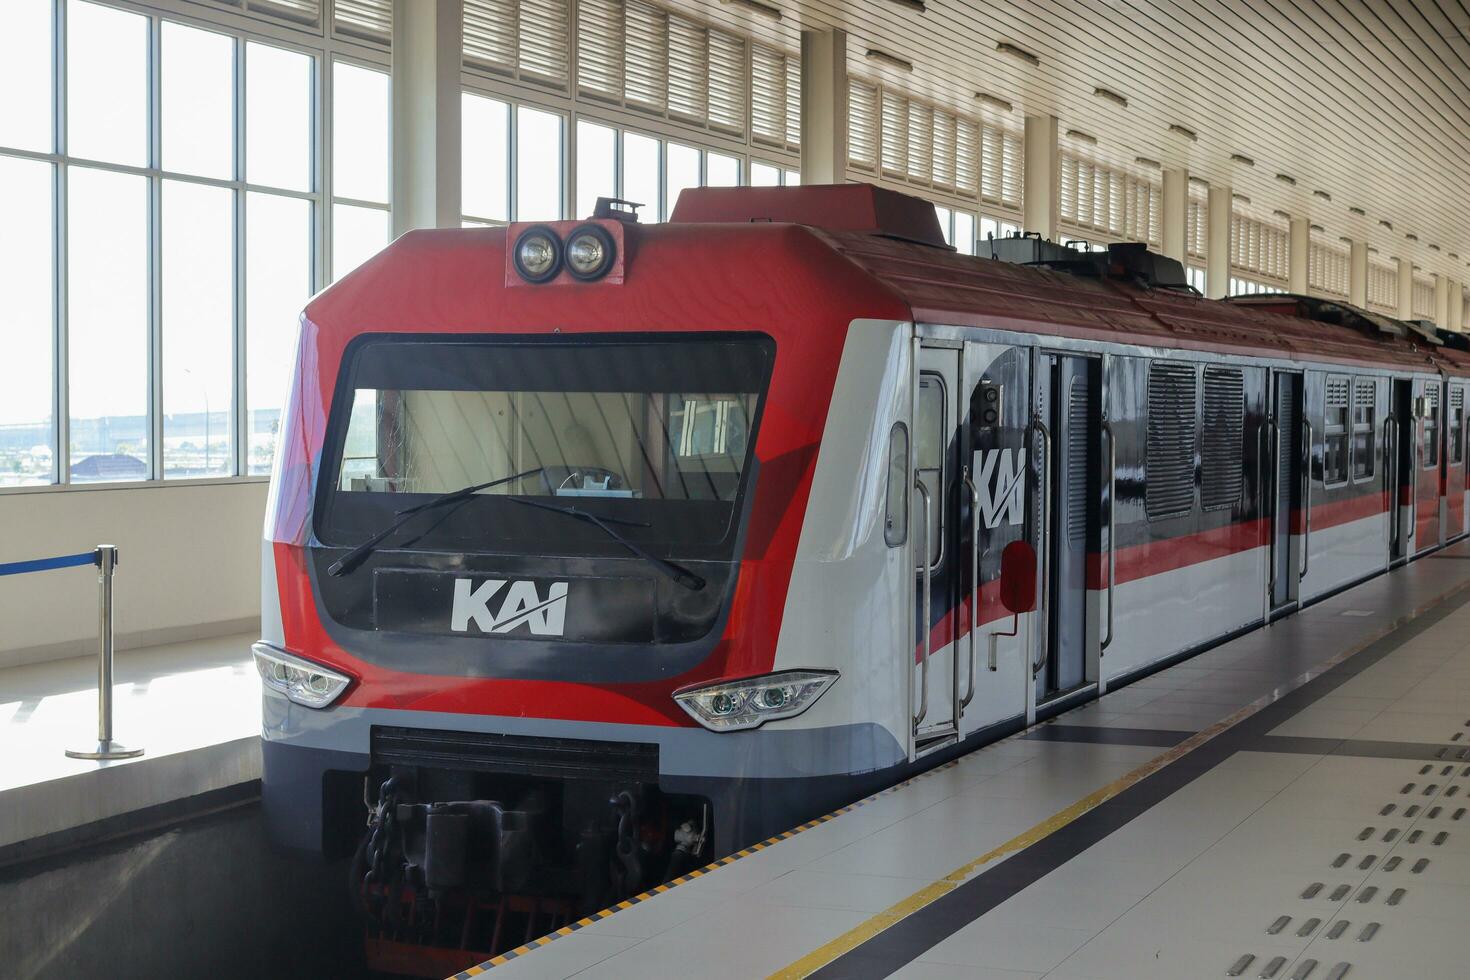 The YIA Airport Train, operated by PT Railink, offers a comfortable and reliable transportation link between Yogyakarta International Airport and the city center. Kulon Progo - Indonesia, 09 03 2023 photo